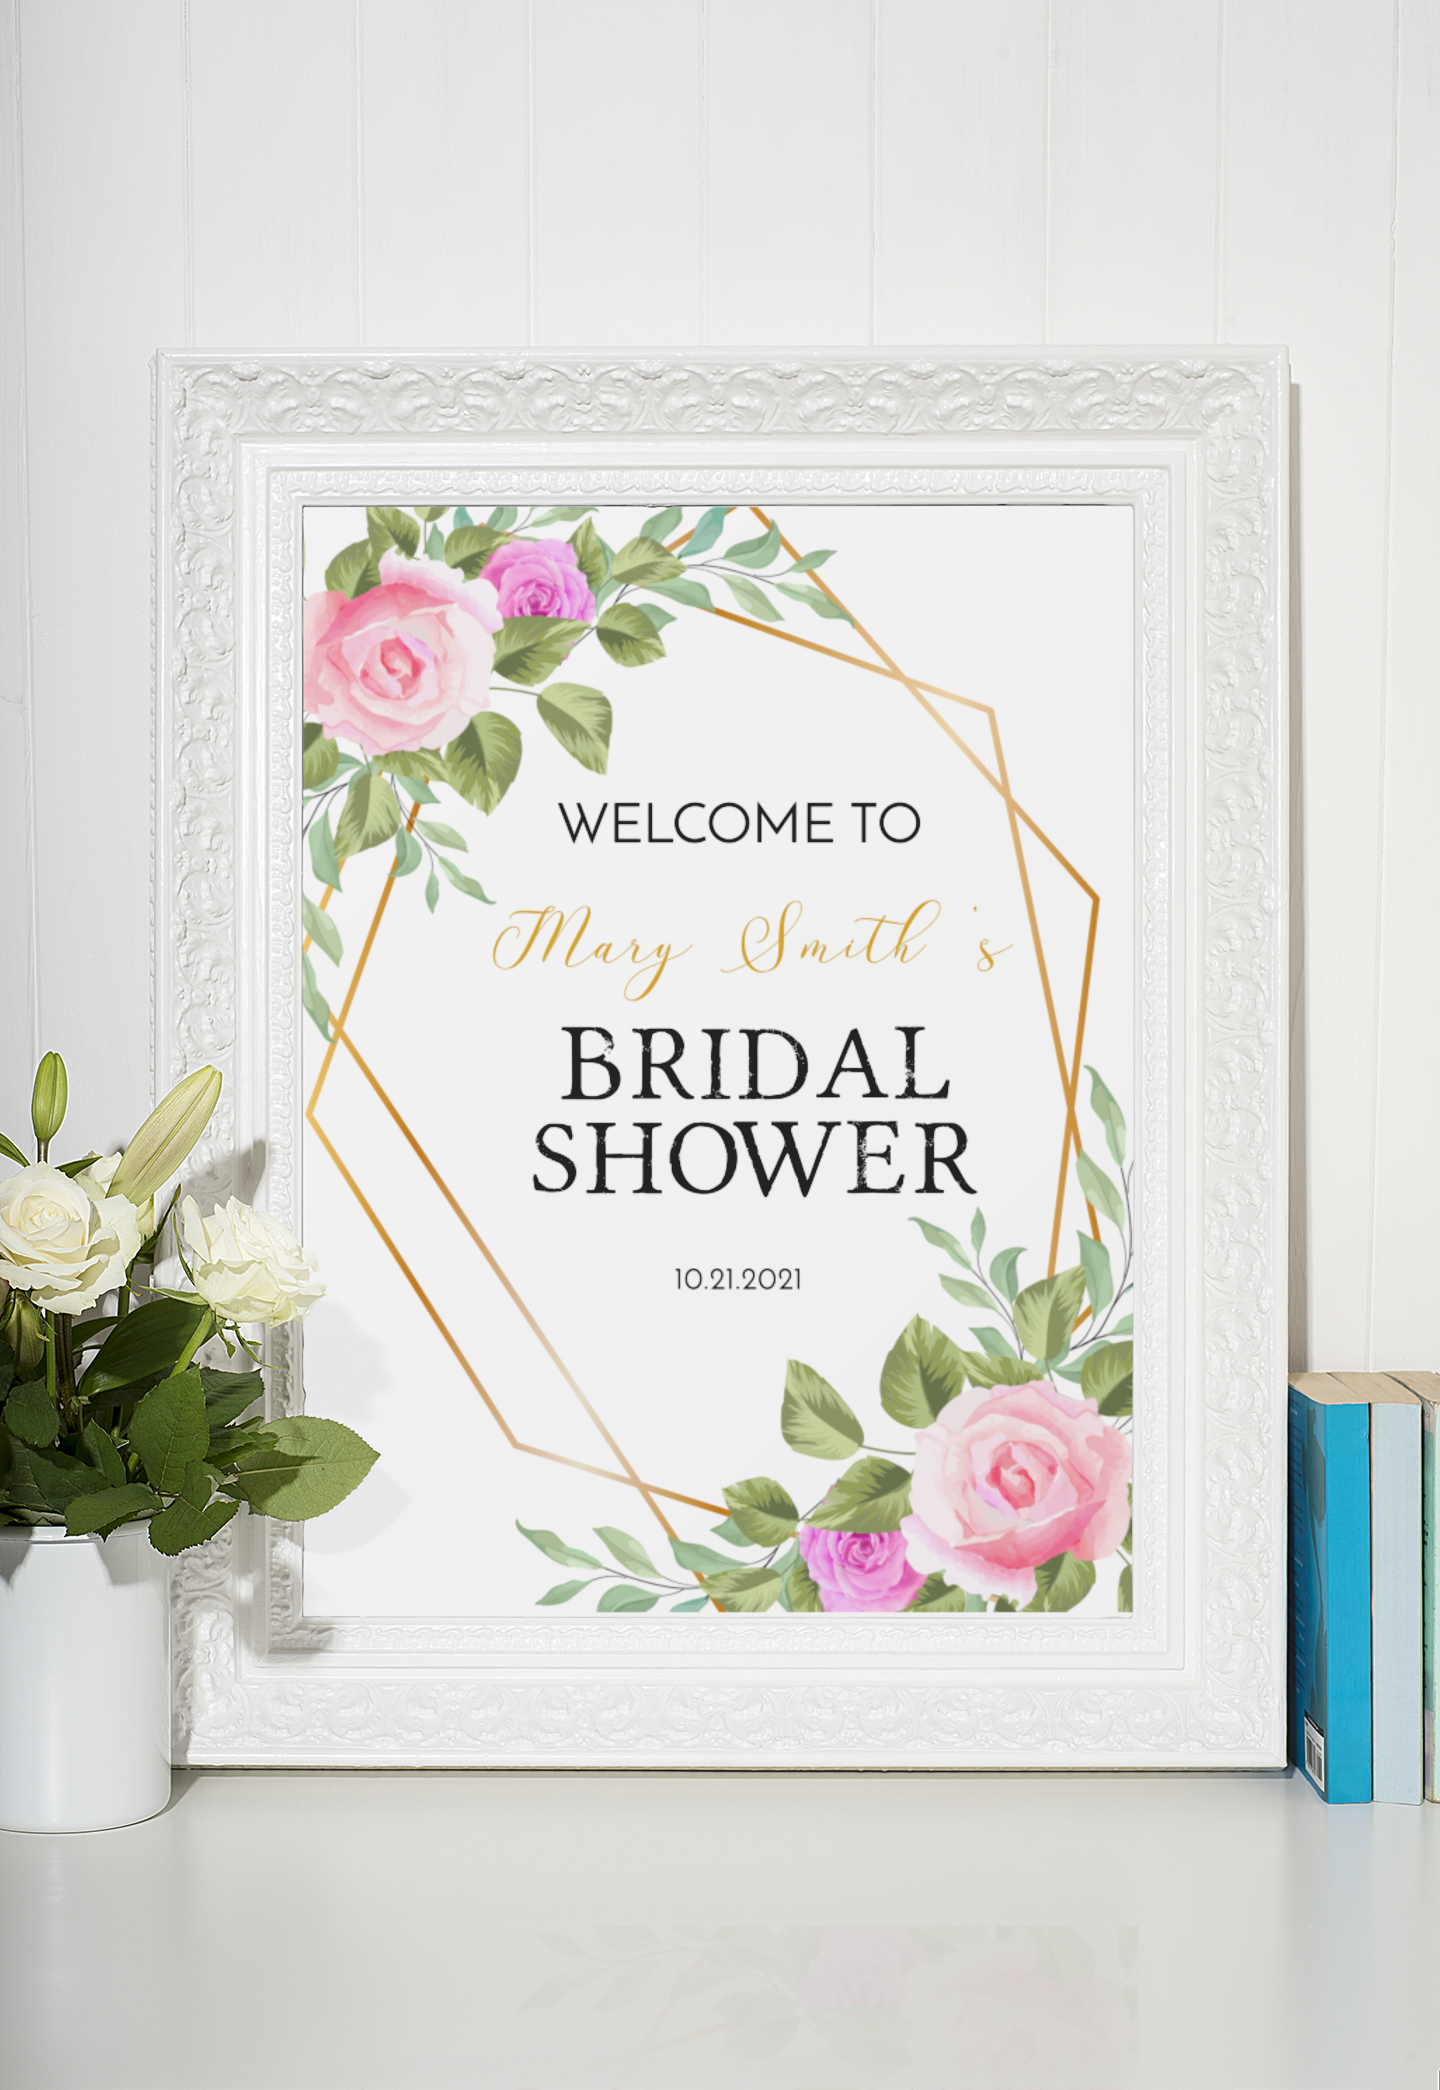 Bridal Shower Welcome Sign Template - Floral - Droo & Aya